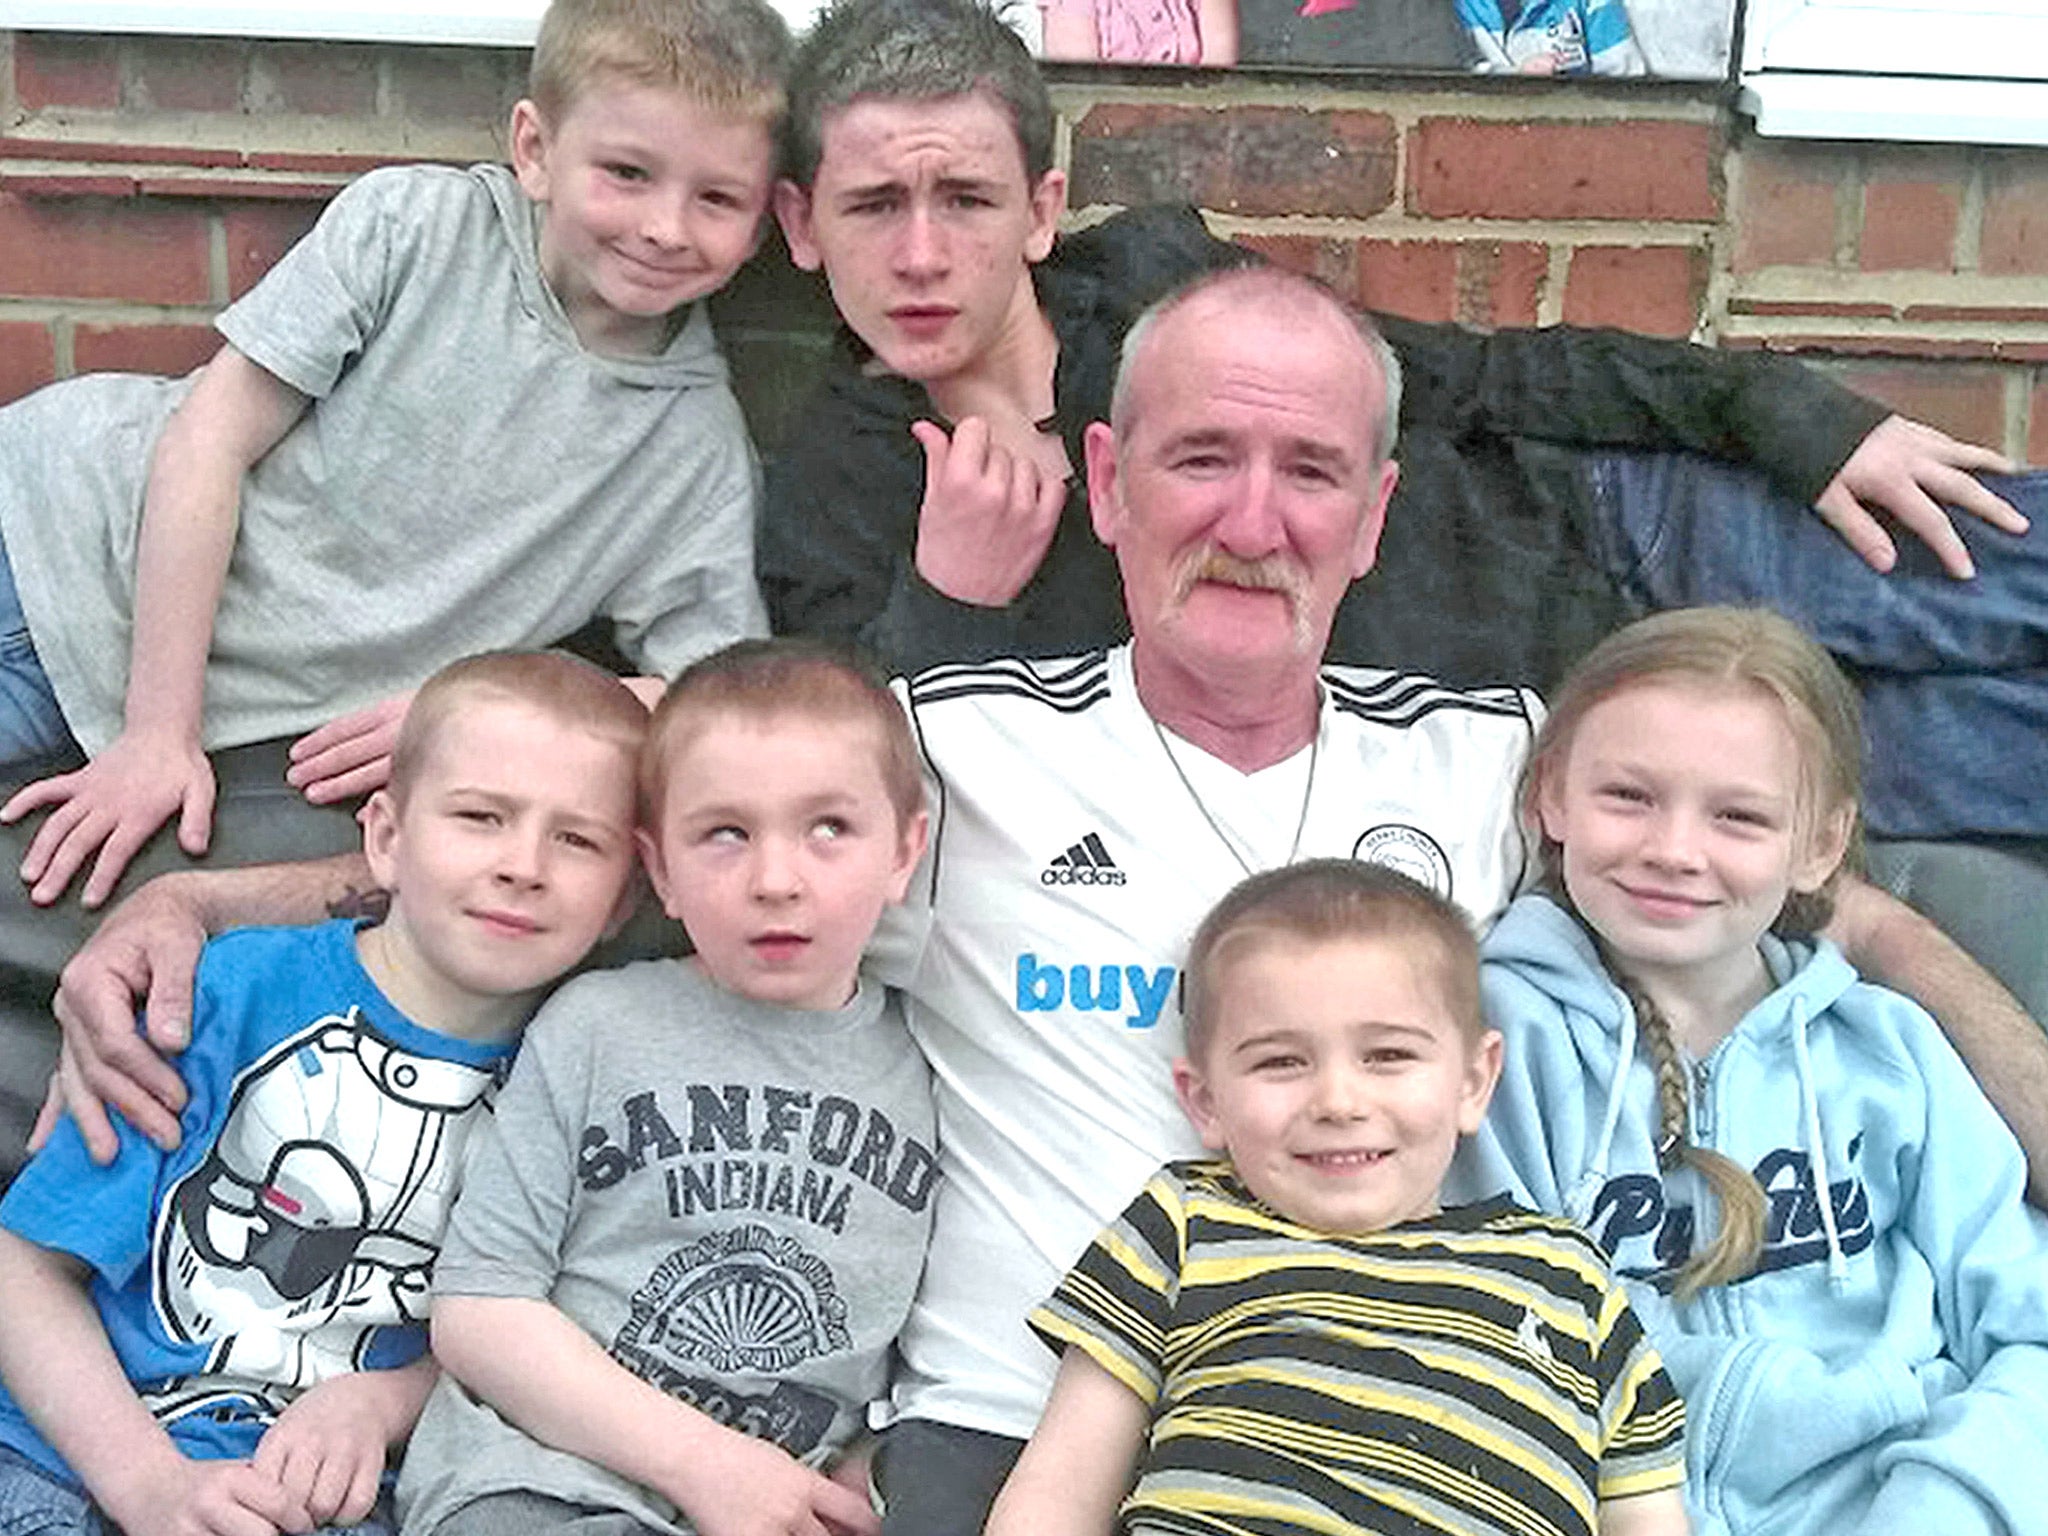 John, 9, Duwayne, 13, Jade, 10, Jayden, 5, Jesse, 6, and Jack Philpott, 7, all died after a blaze was started deliberately at the family's semi-detached house in Allenton, Derby